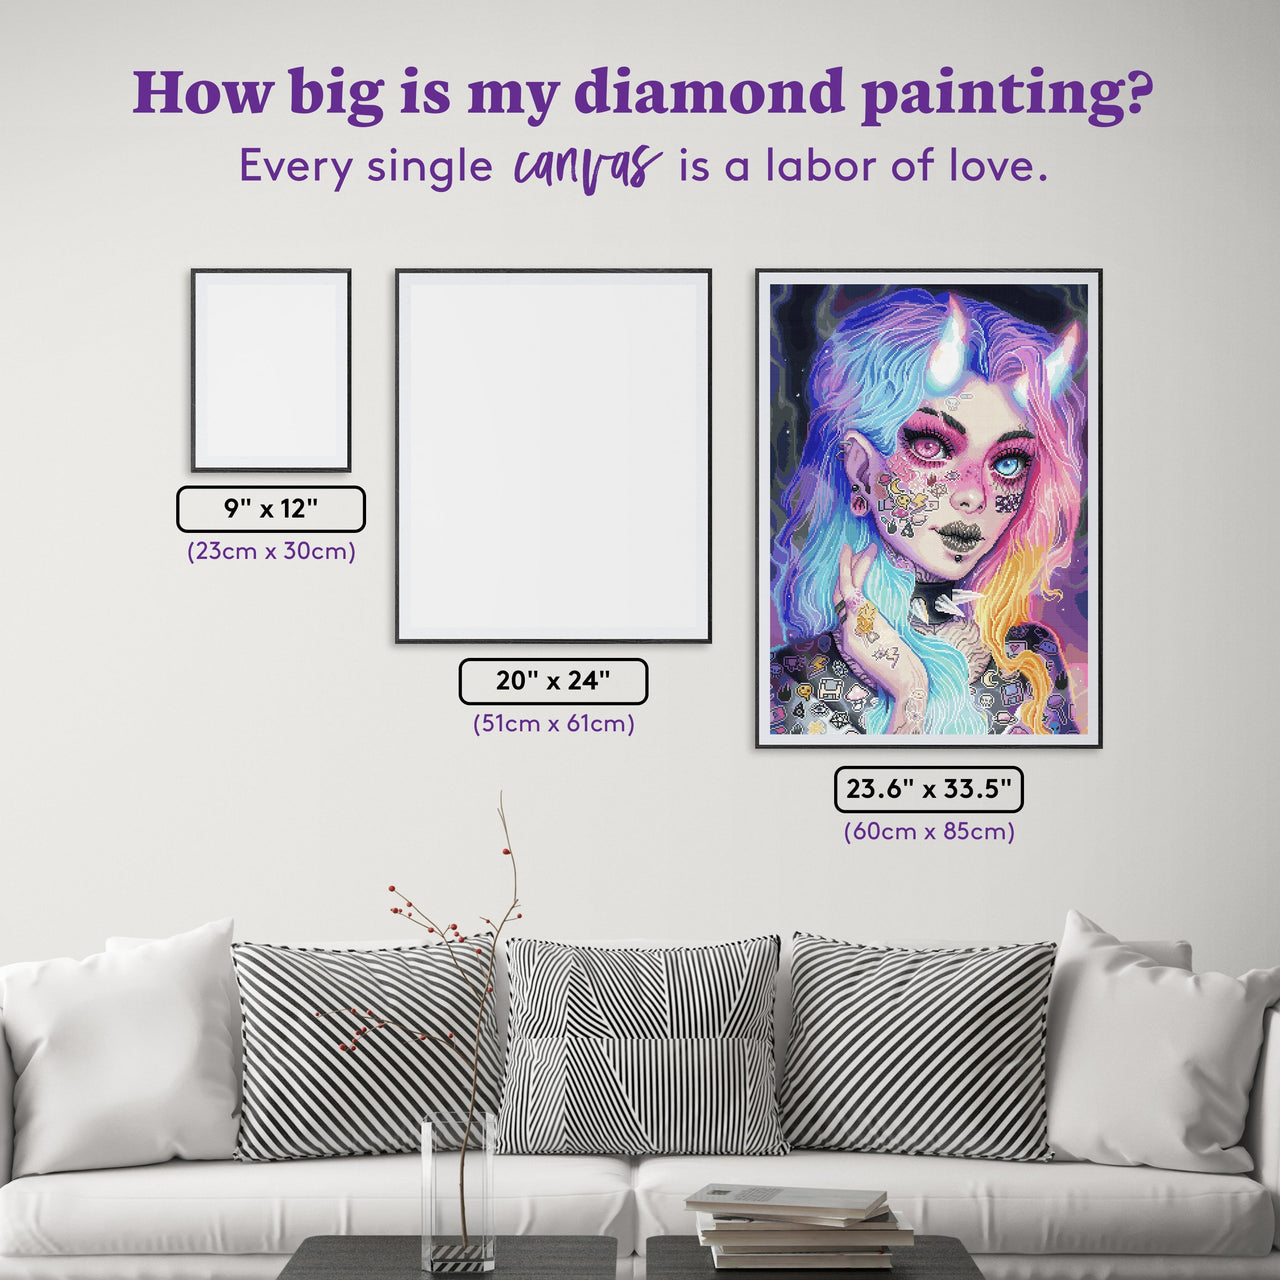 Diamond Painting Cutie 23.6" x 33.5" (60cm x 85cm) / Square with 61 Colors including 2 ABs and 3 Fairy Dust Diamonds / 82,181